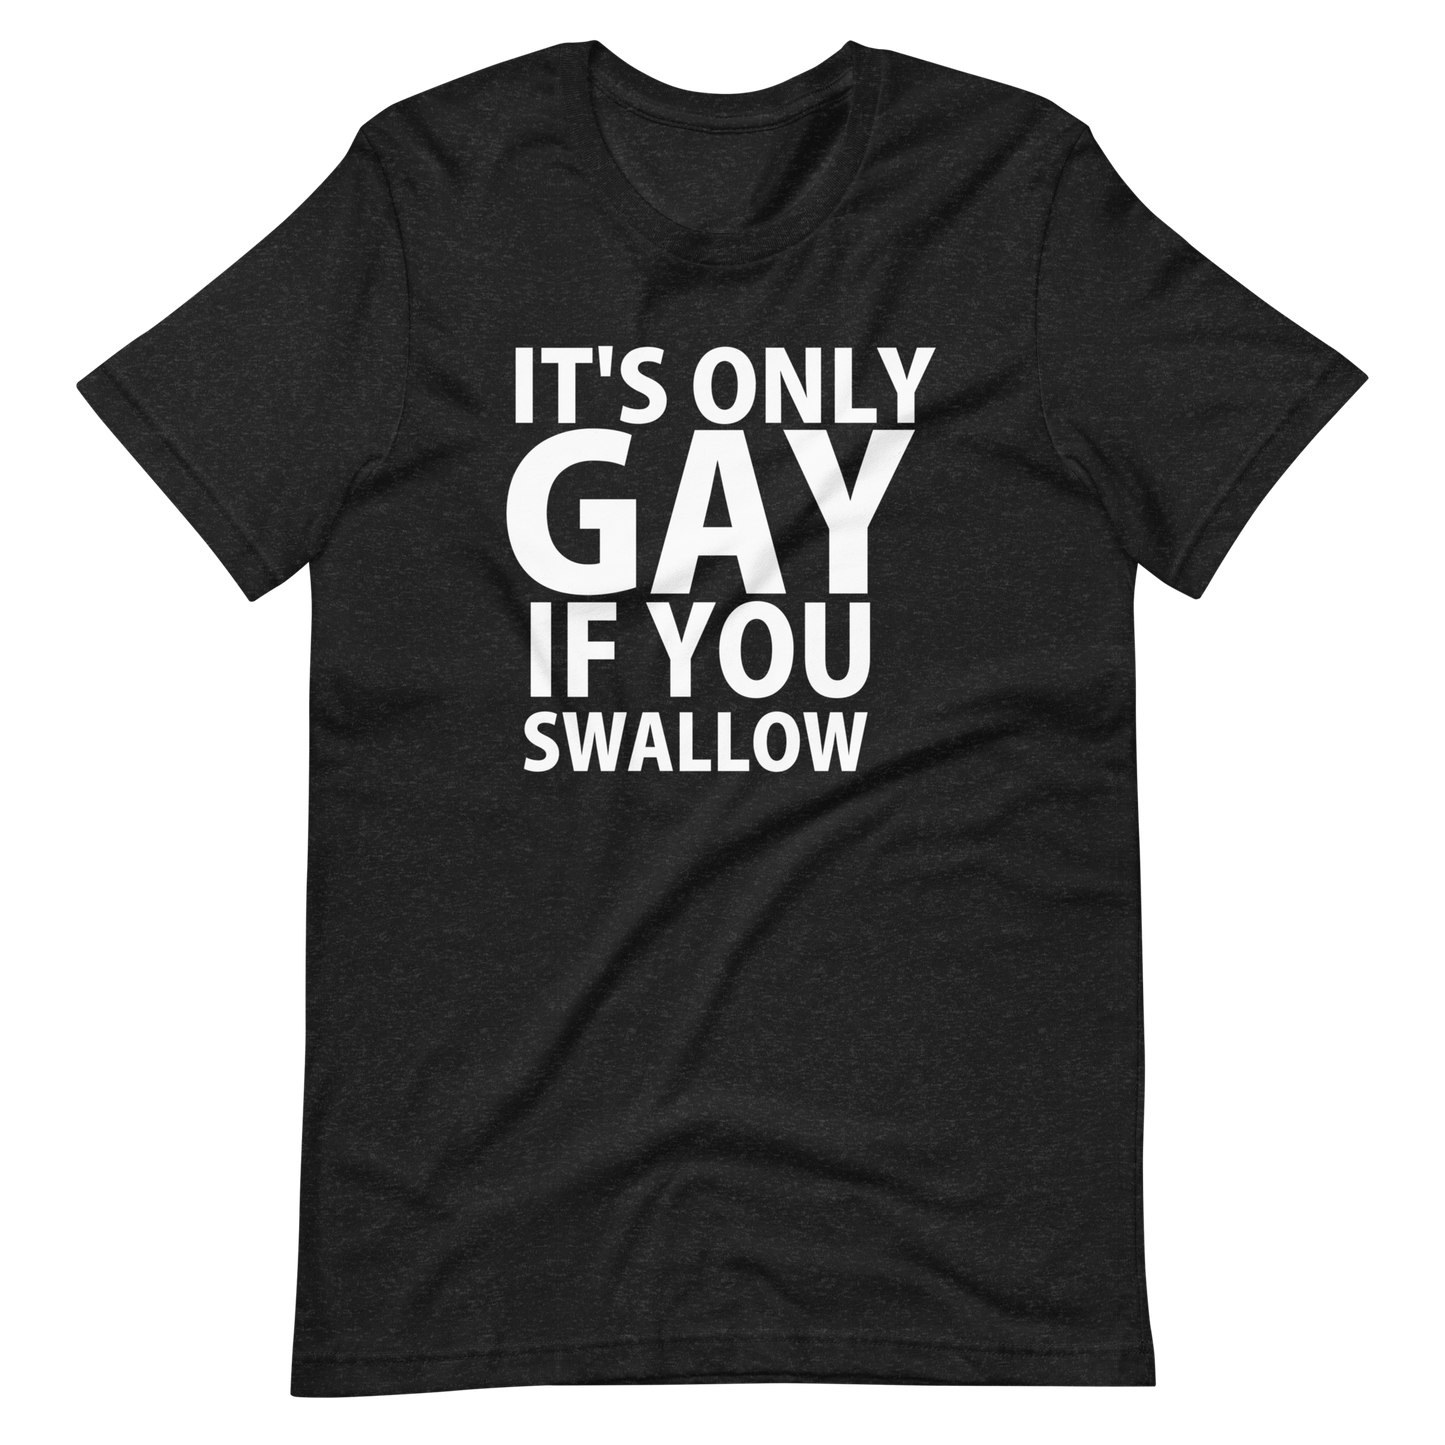 It's Only Gay If You Swallow T-Shirt - Black Heather